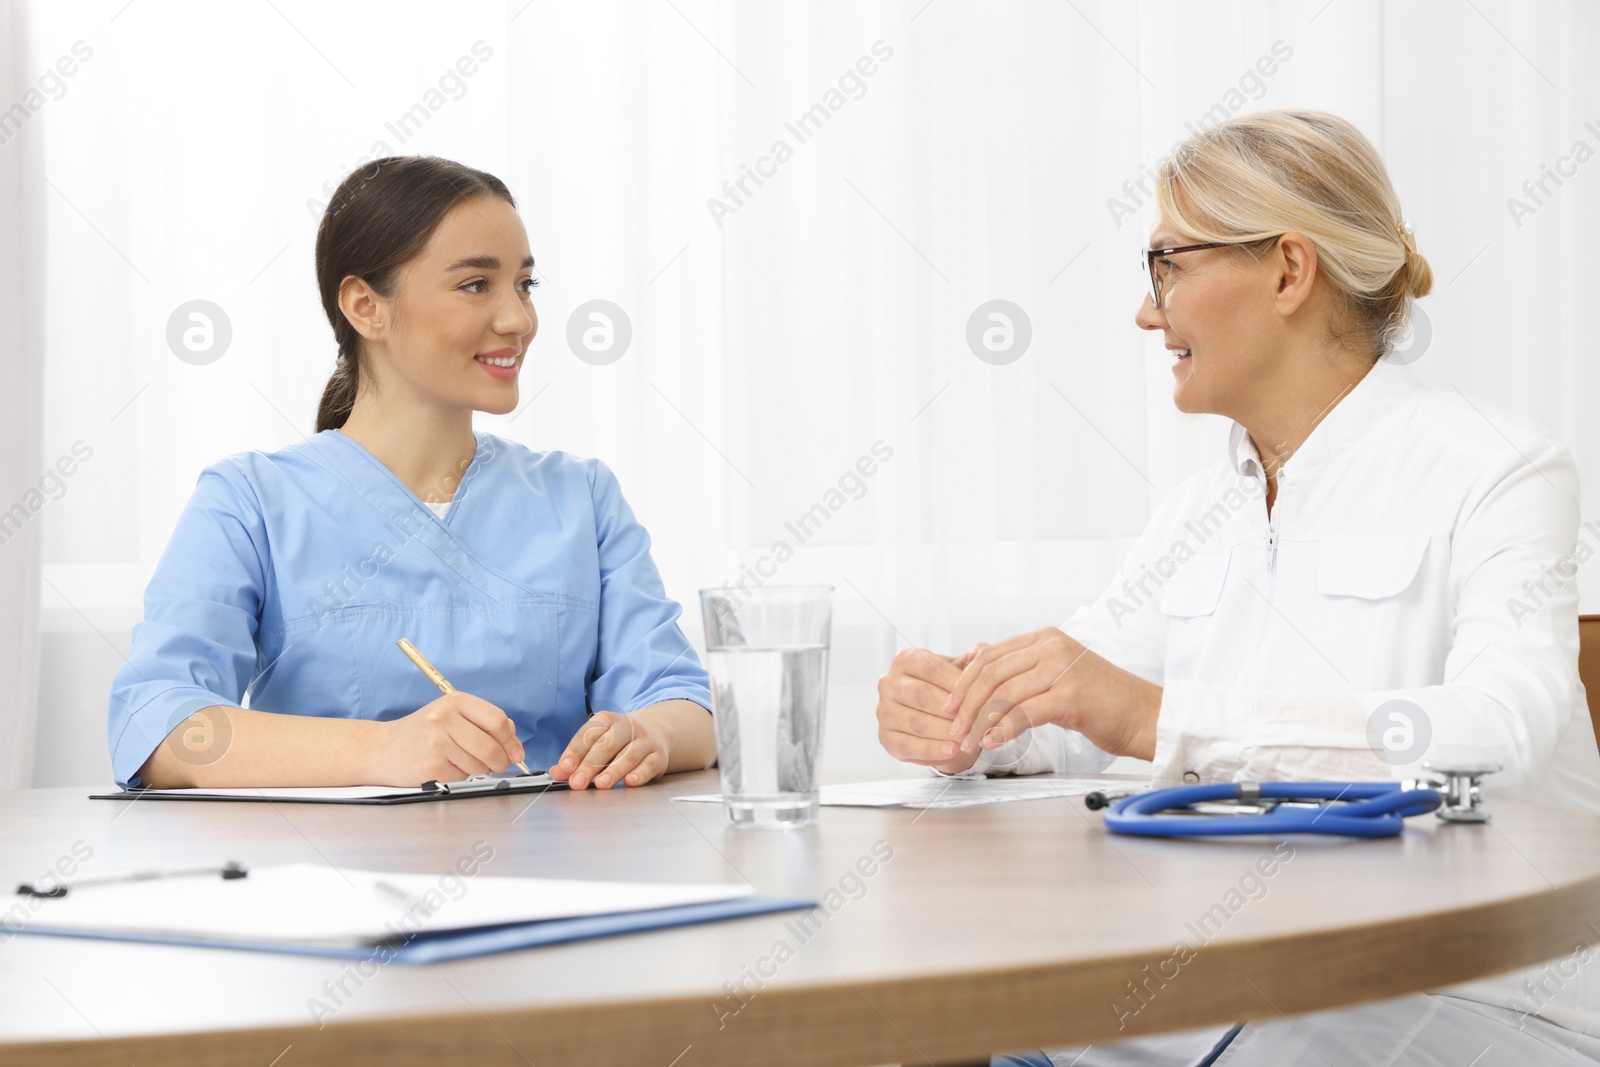 Photo of Medical conference. Doctors having discussion at wooden table in office